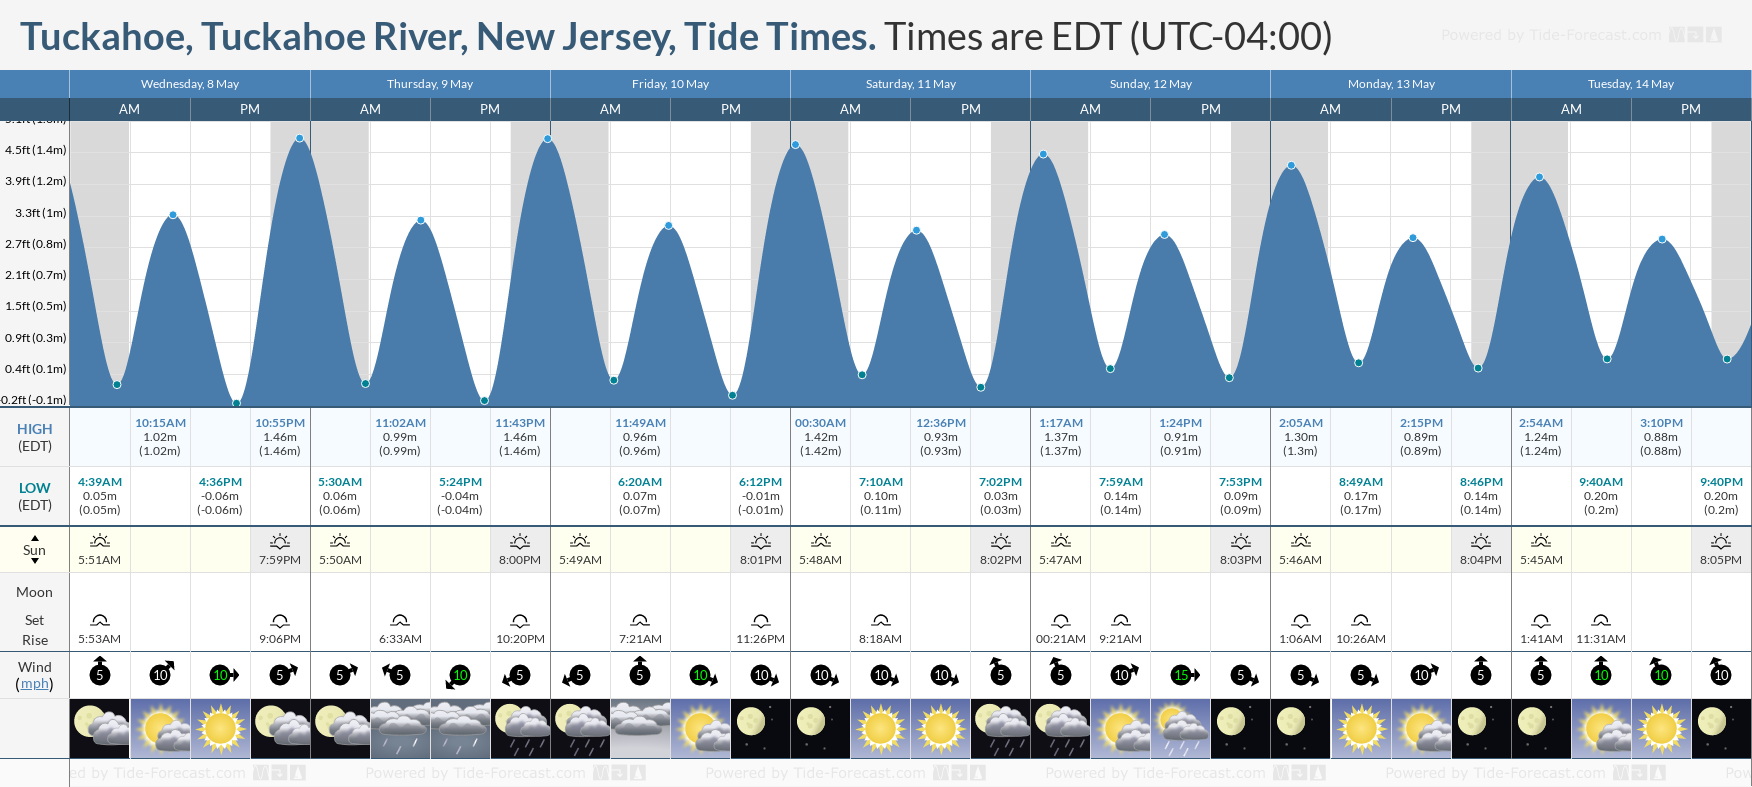 Tuckahoe, Tuckahoe River, New Jersey Tide Chart including high and low tide times for the next 7 days